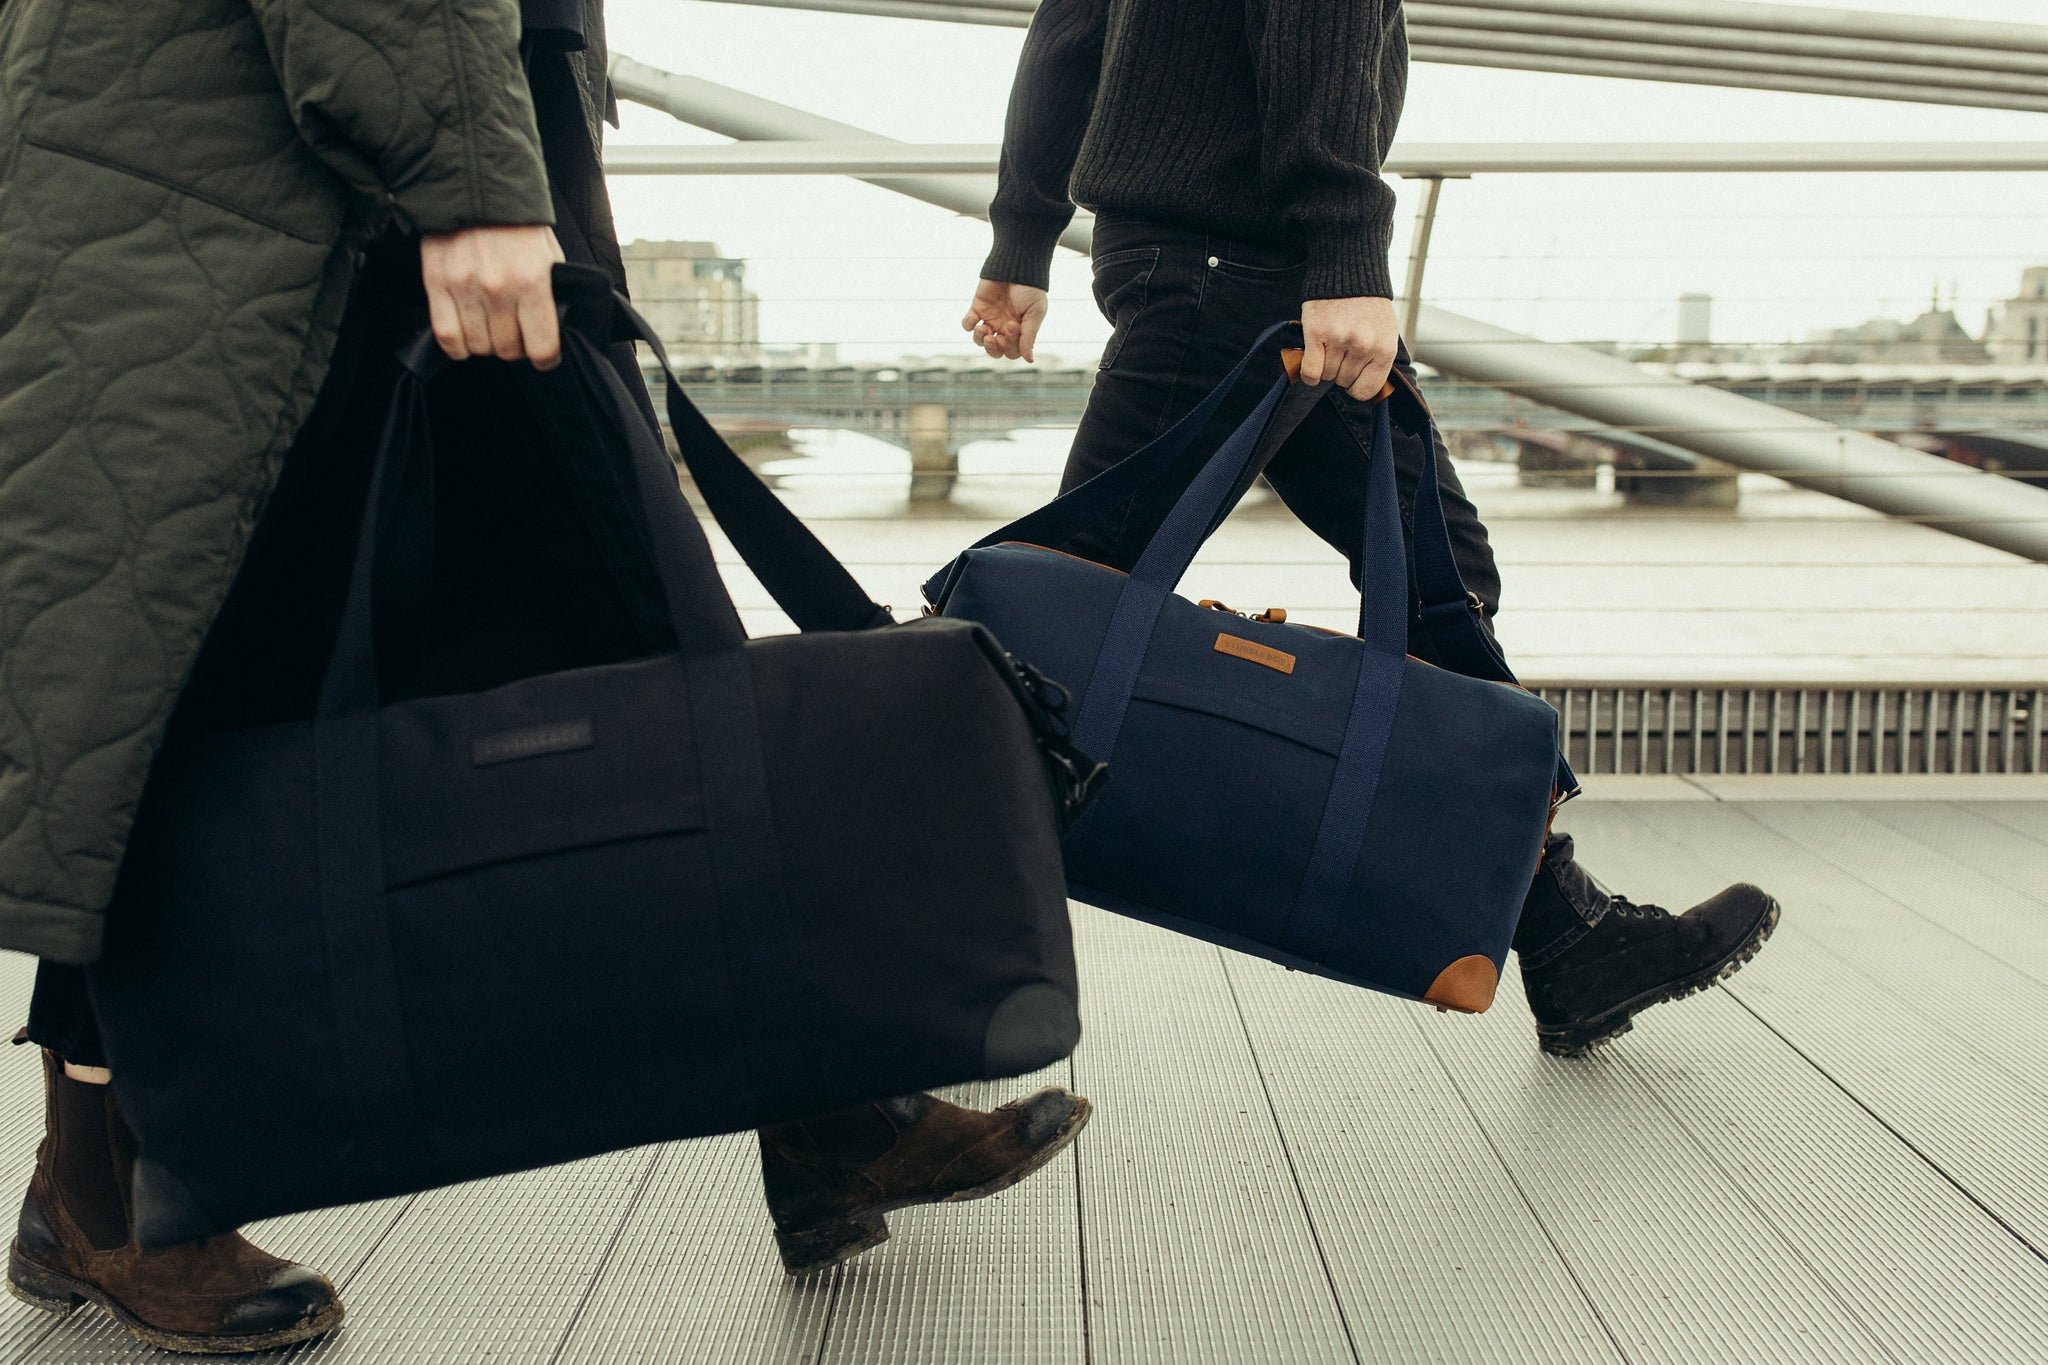 Two people carrying holdall duffle bags